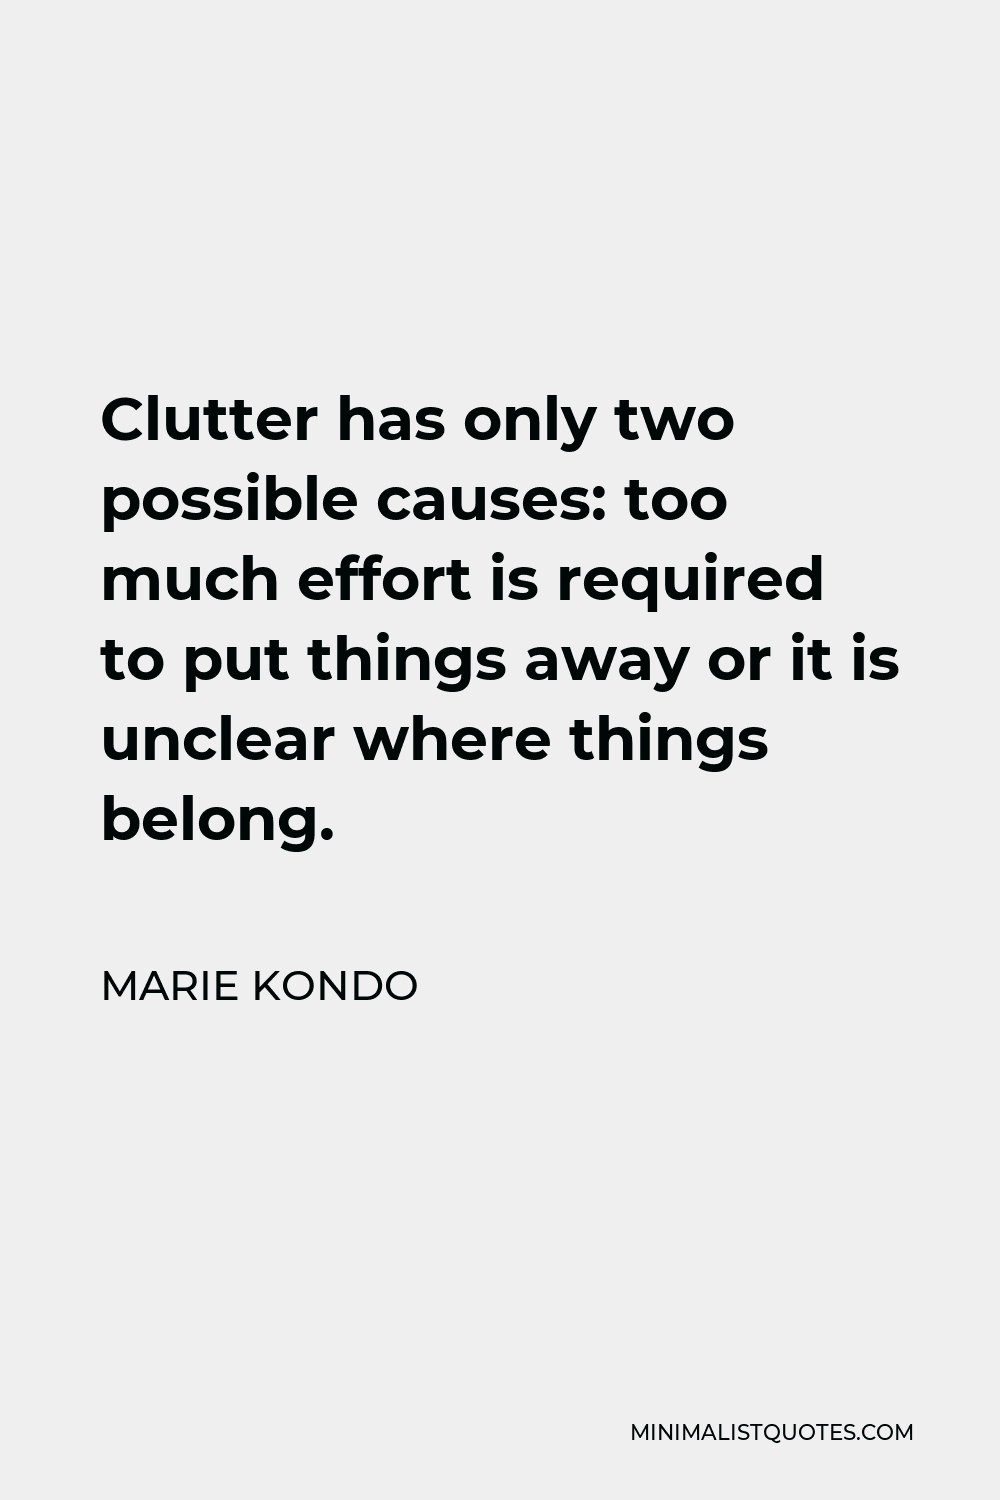 Marie Kondo Quote - Clutter has only two possible causes: too much effort is required to put things away or it is unclear where things belong.